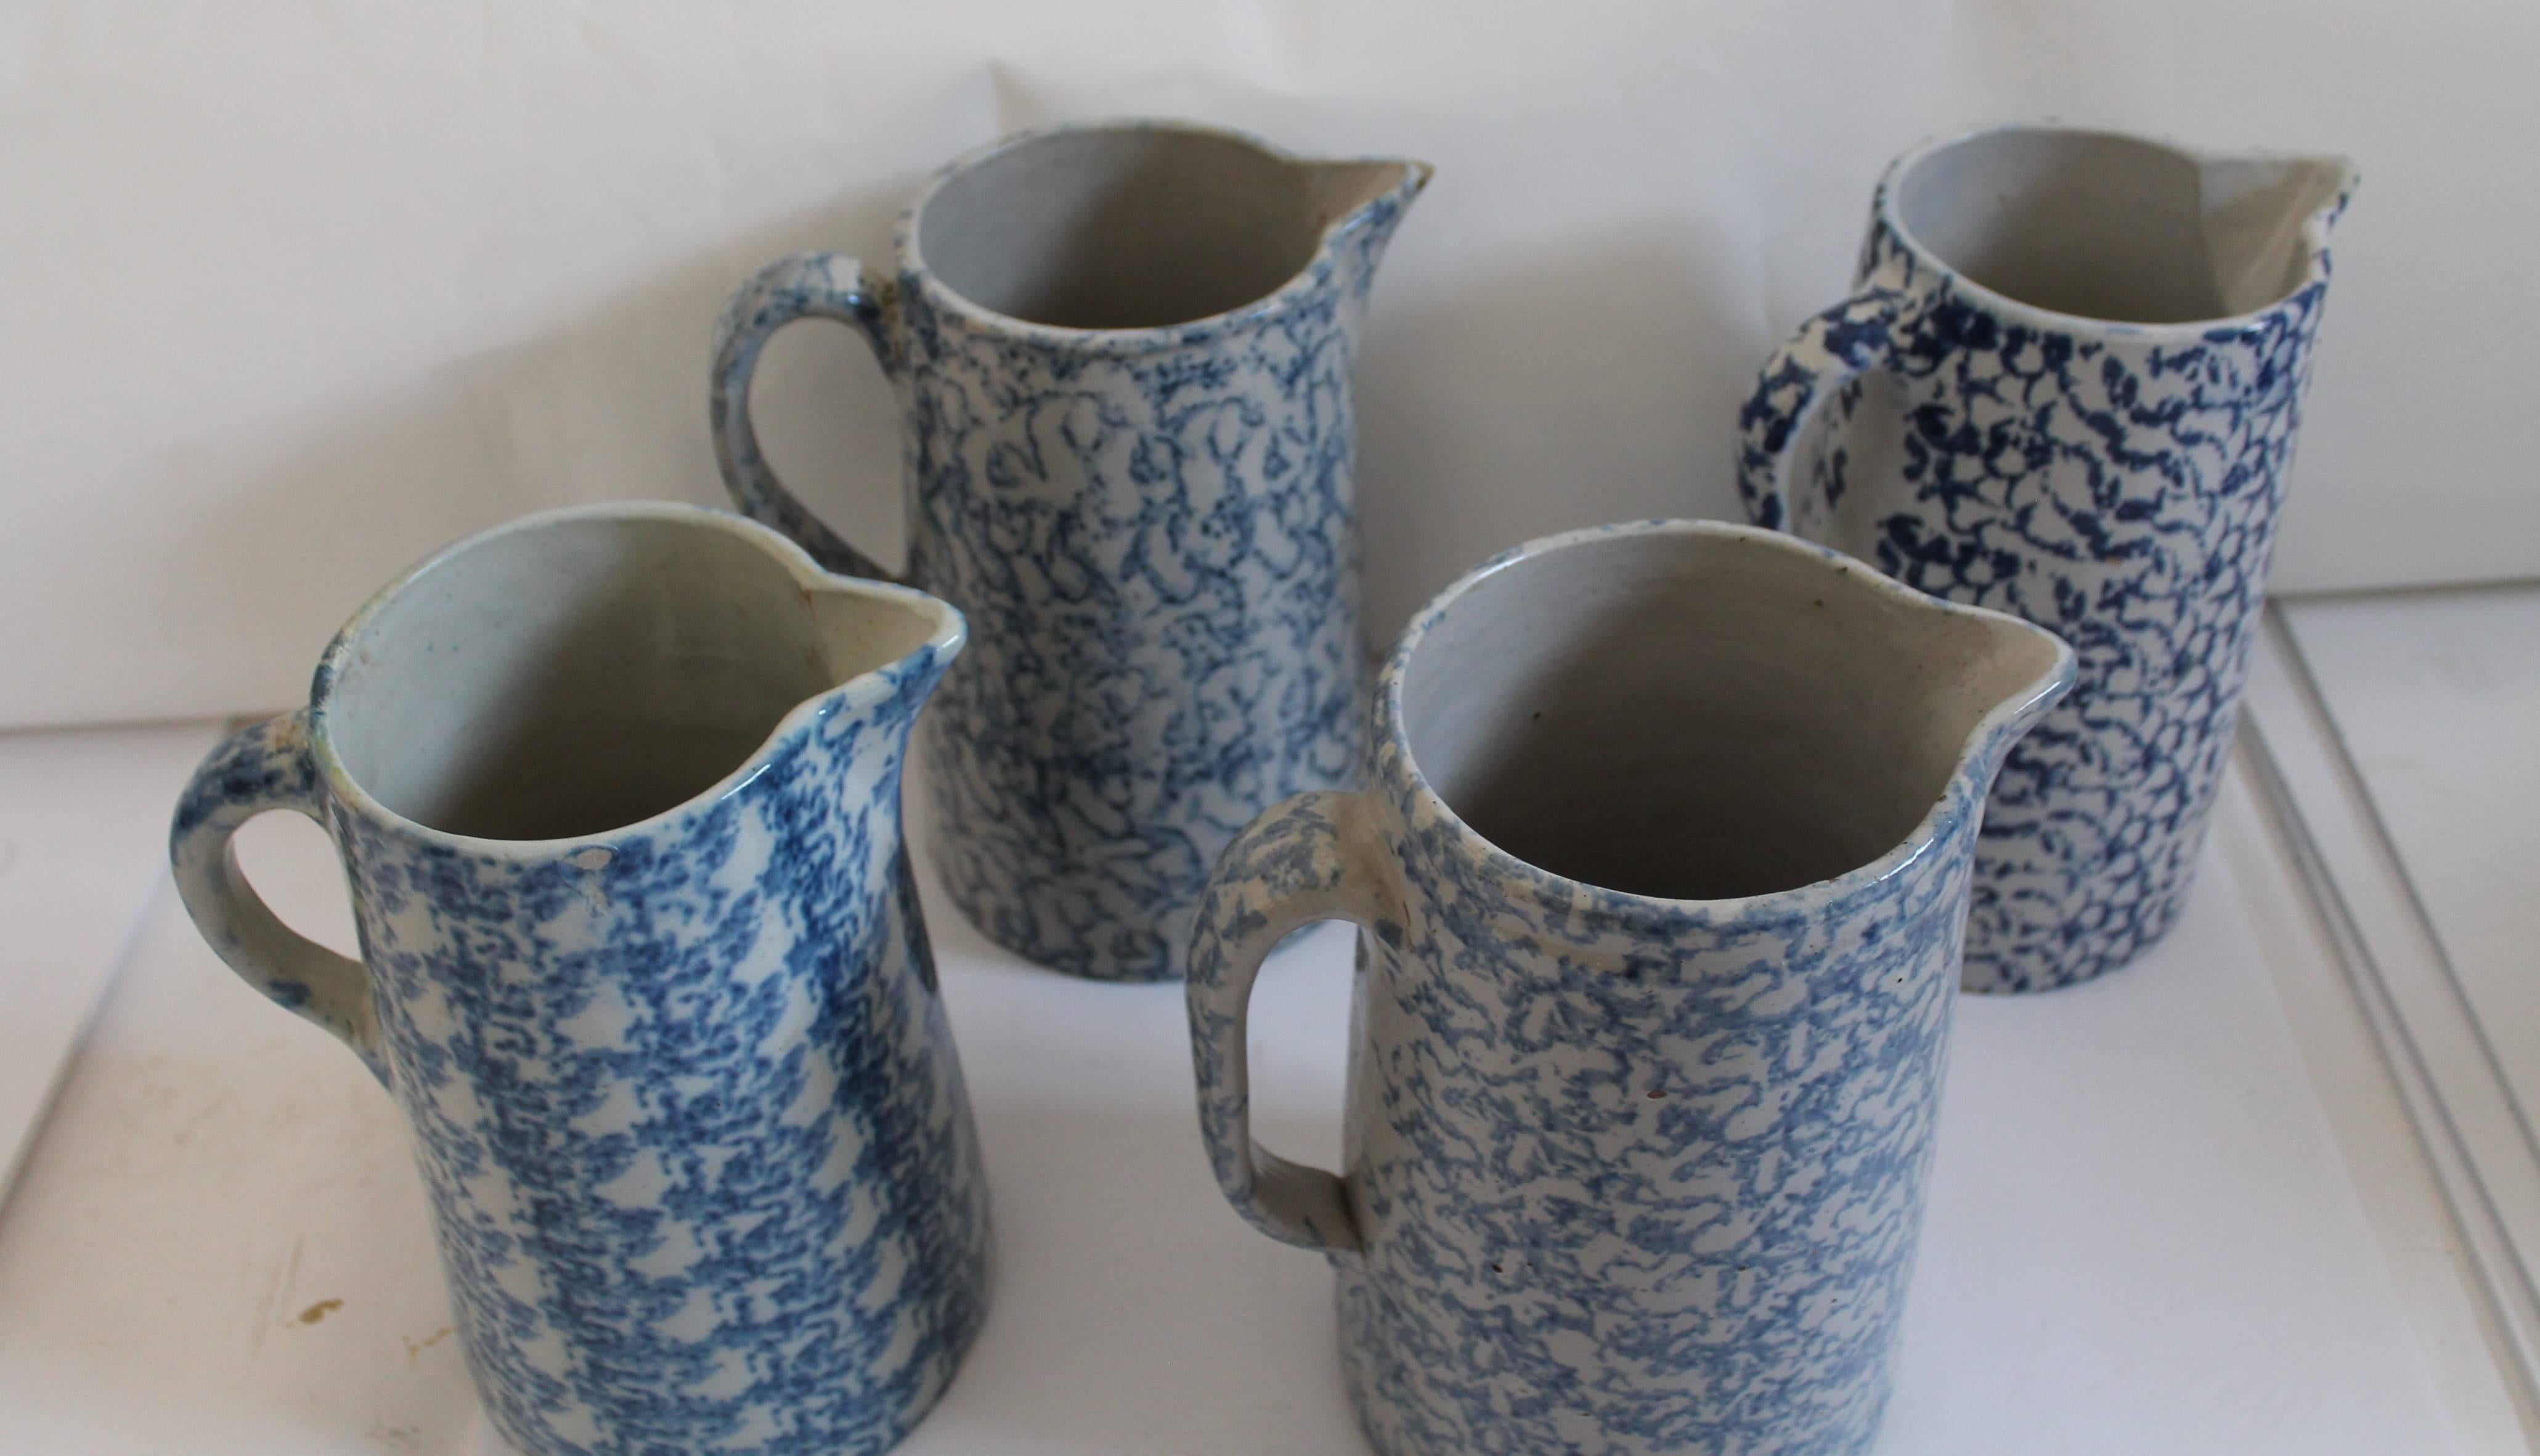 Country Collection of Four 19th Century Spongeware Pottery Pitchers